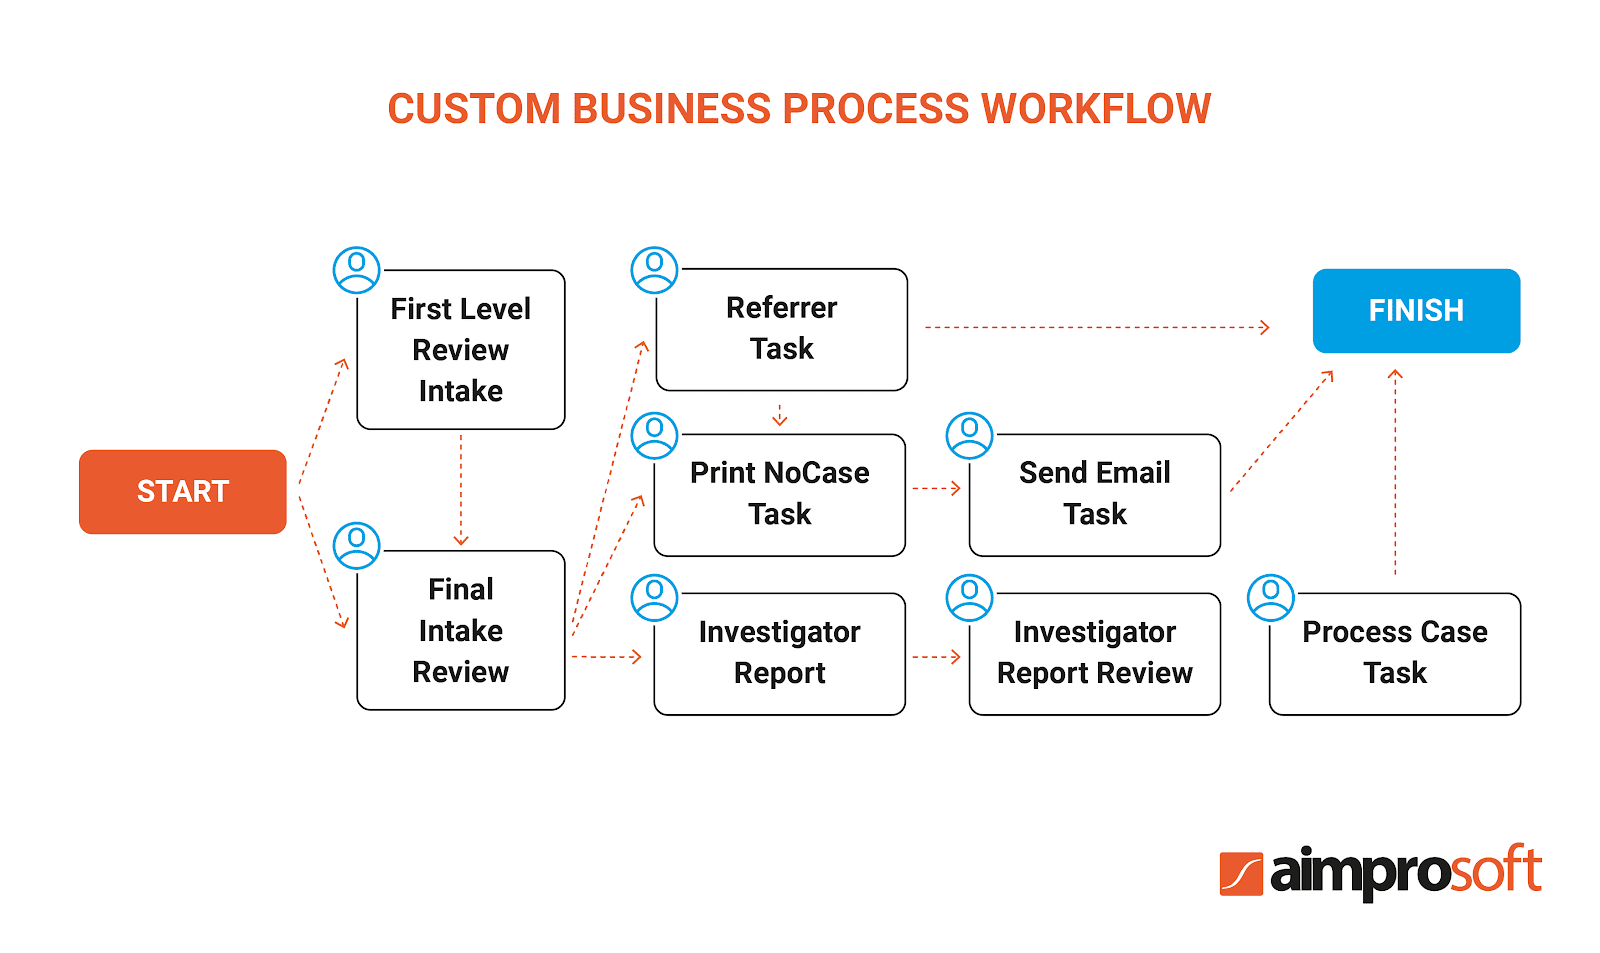 Alfresco custom business process workflow in a legal document system